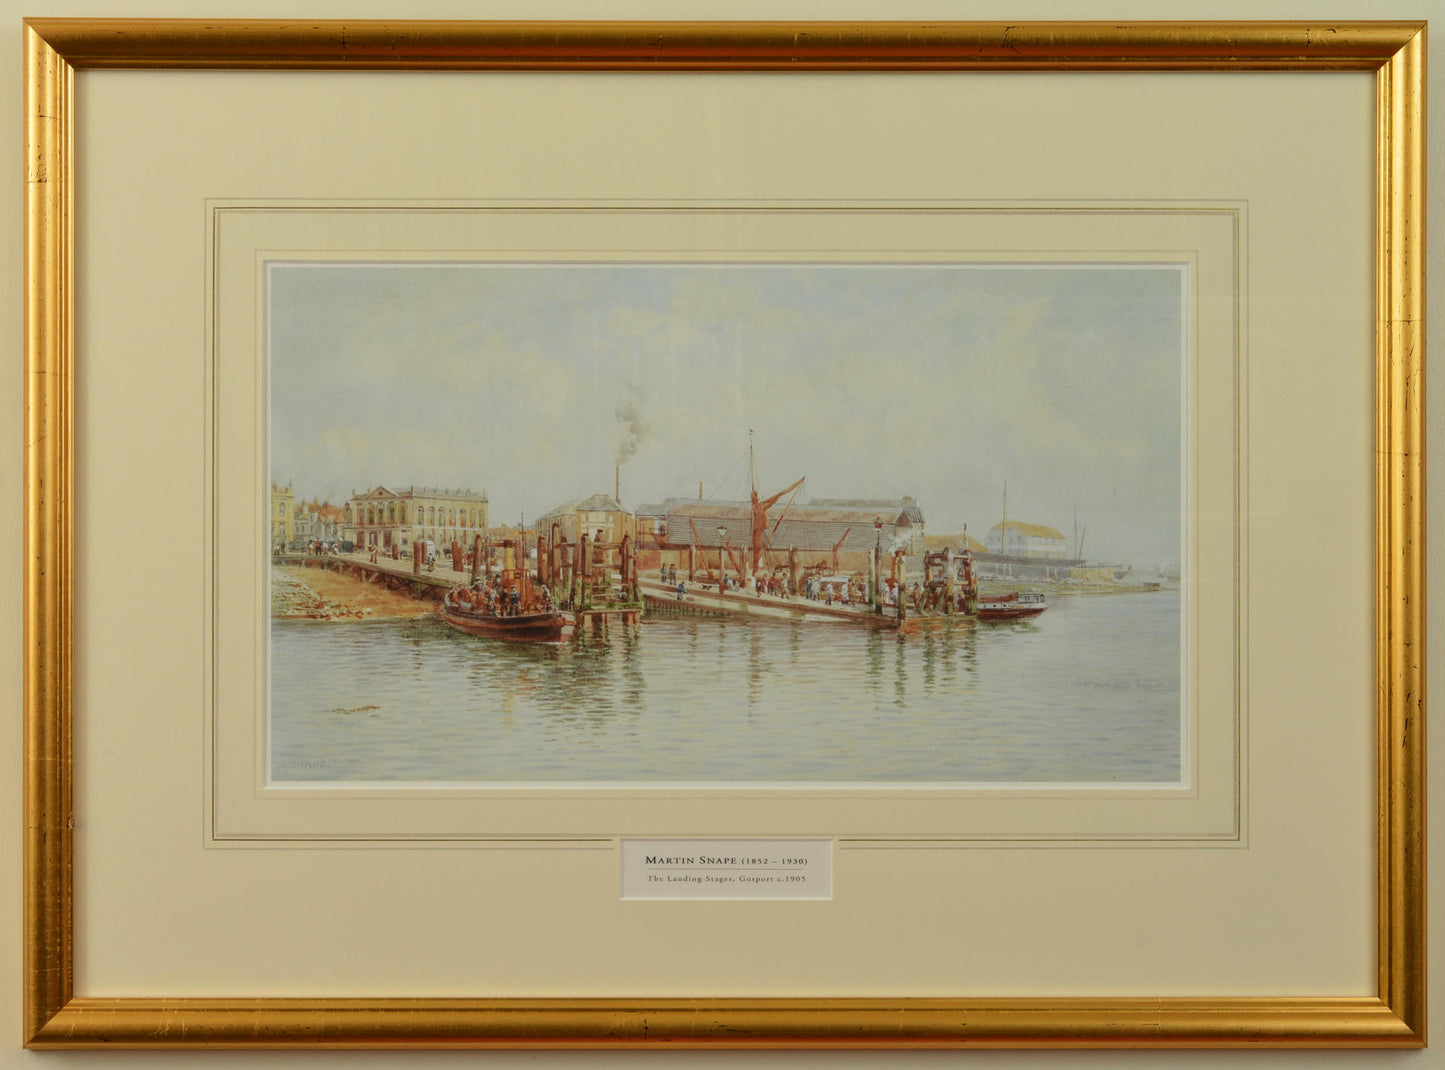 The Landing Stages, Gosport c.1905, by Martin Snape